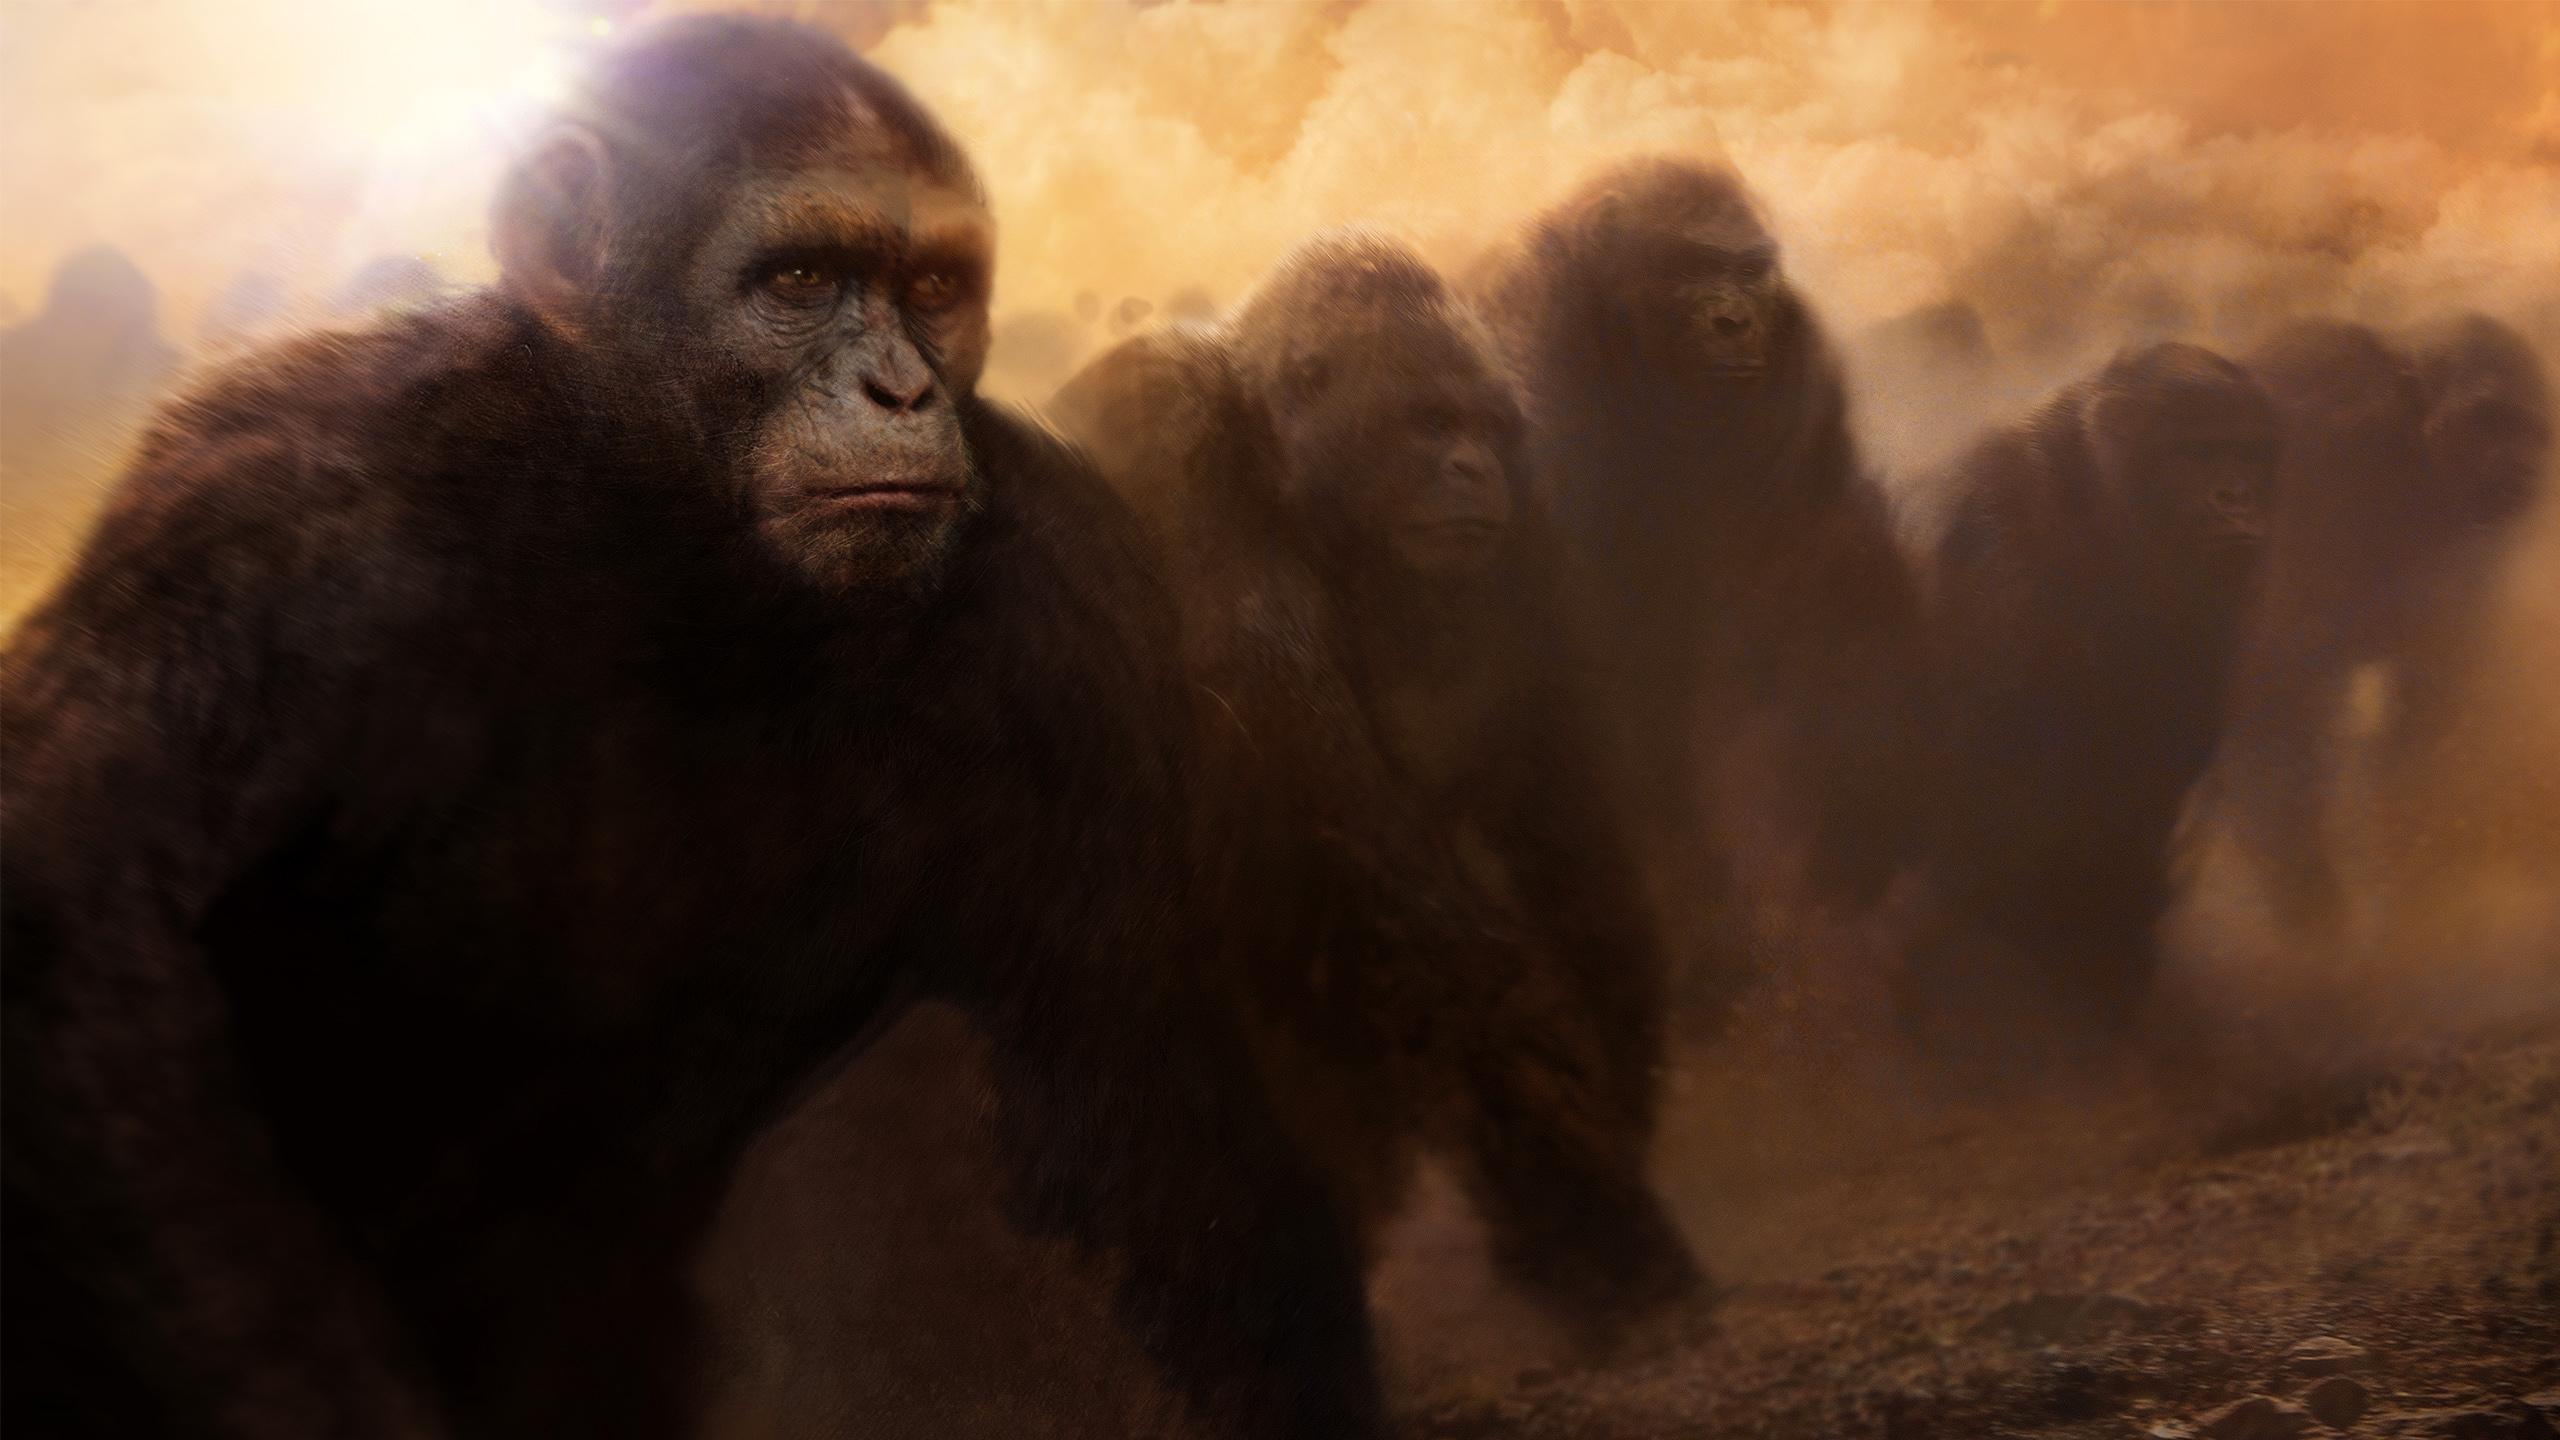 Rise Of The Planet Of The Apes Wallpapers Hd Download.